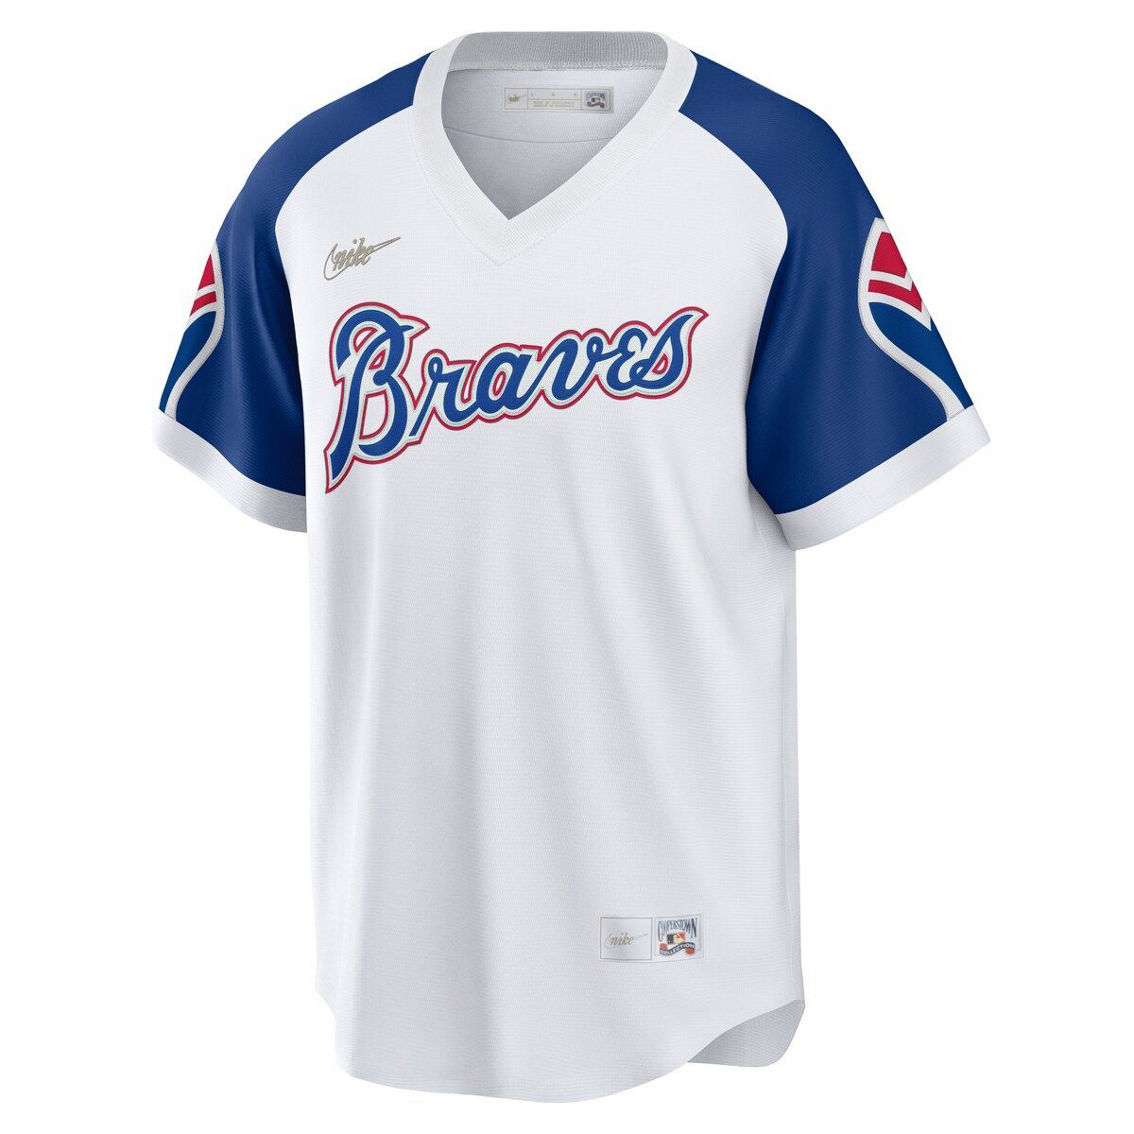 Nike Men's Hank Aaron White Atlanta Braves Home Cooperstown Collection Player Jersey - Image 3 of 4